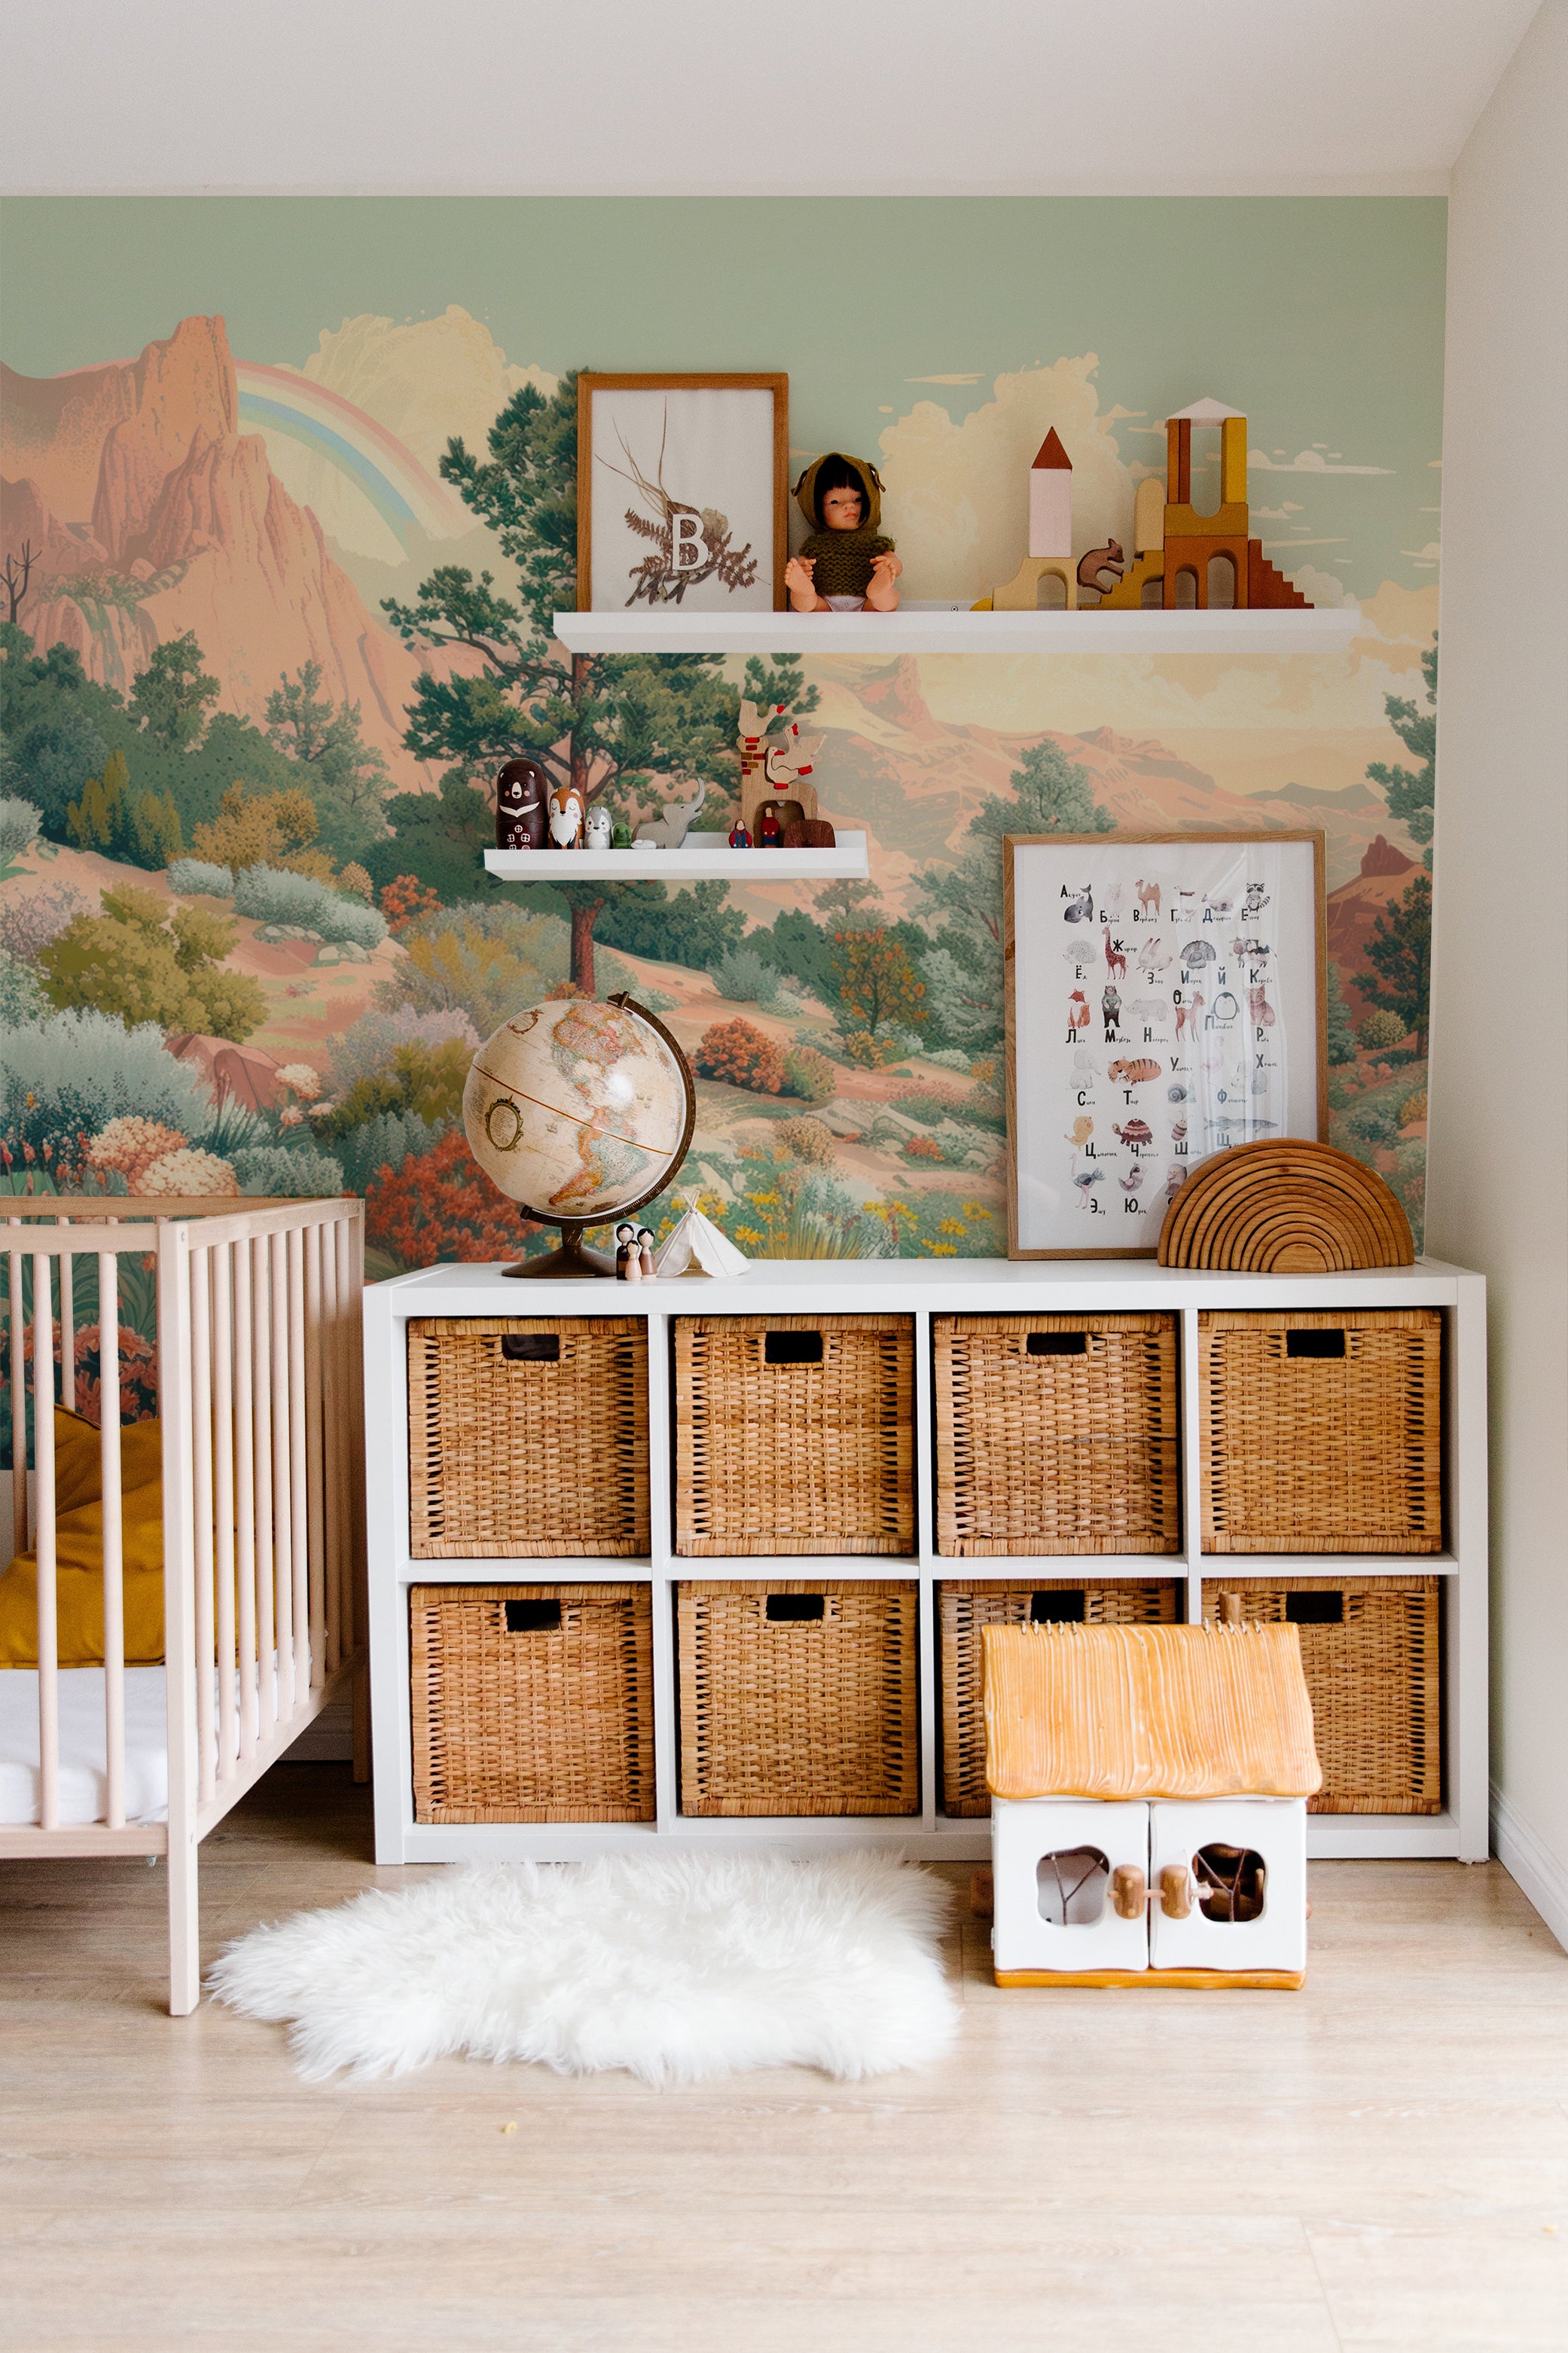 A nursery room decorated with a desert-themed wallpaper showing a mountainous landscape under a bright sky. The room includes a crib, a wicker basket storage unit, and decorative items that complement the earthy tones of the mural.